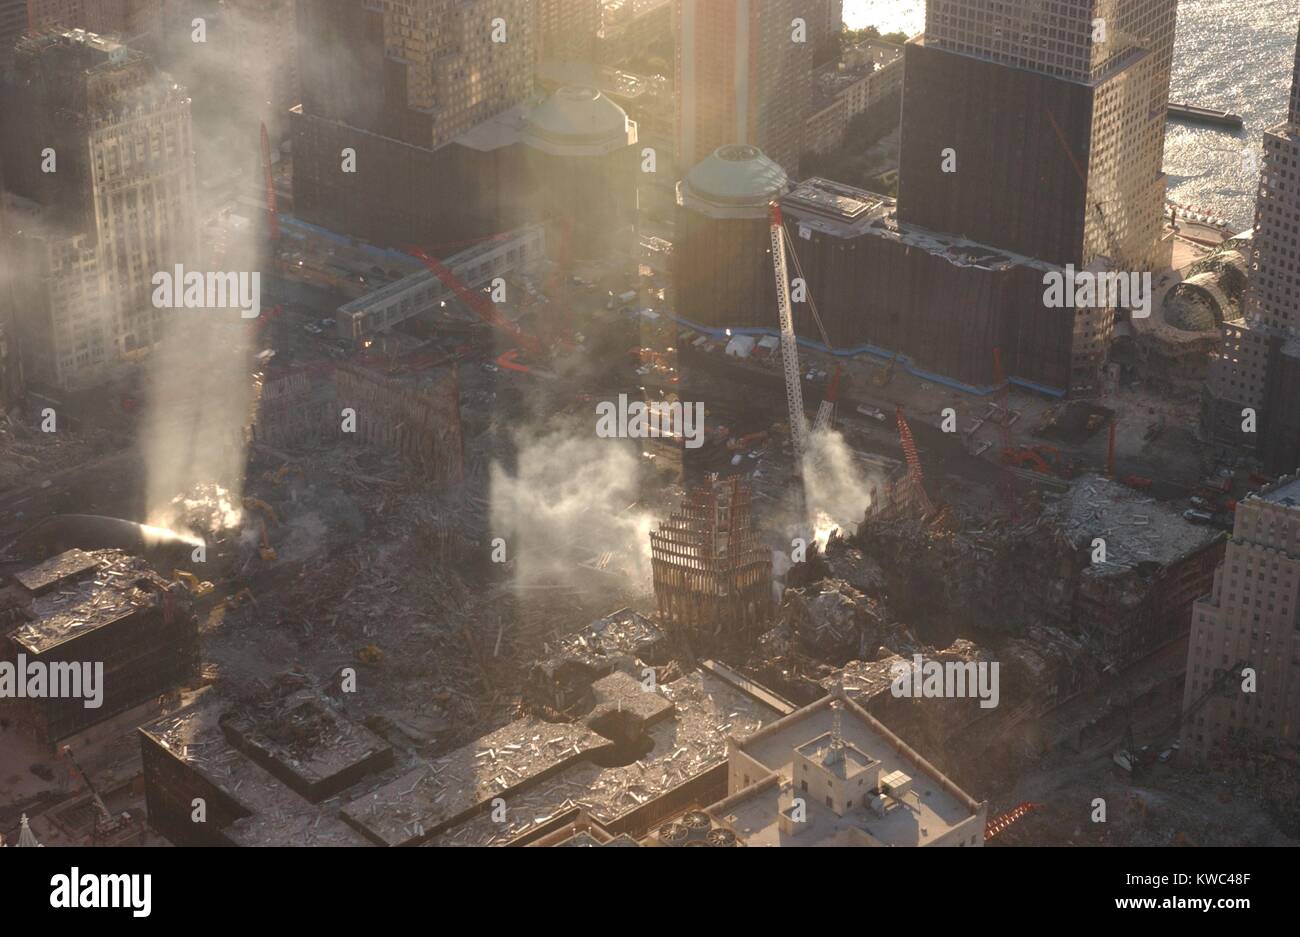 Aerial view of Ground Zero from the northeast as the late afternoon sun illuminates the smoke. Oct. 8, 2001. World Trade Center, New York City, after September 11, 2001 terrorist attacks. (BSLOC 2015 2 114) Stock Photo